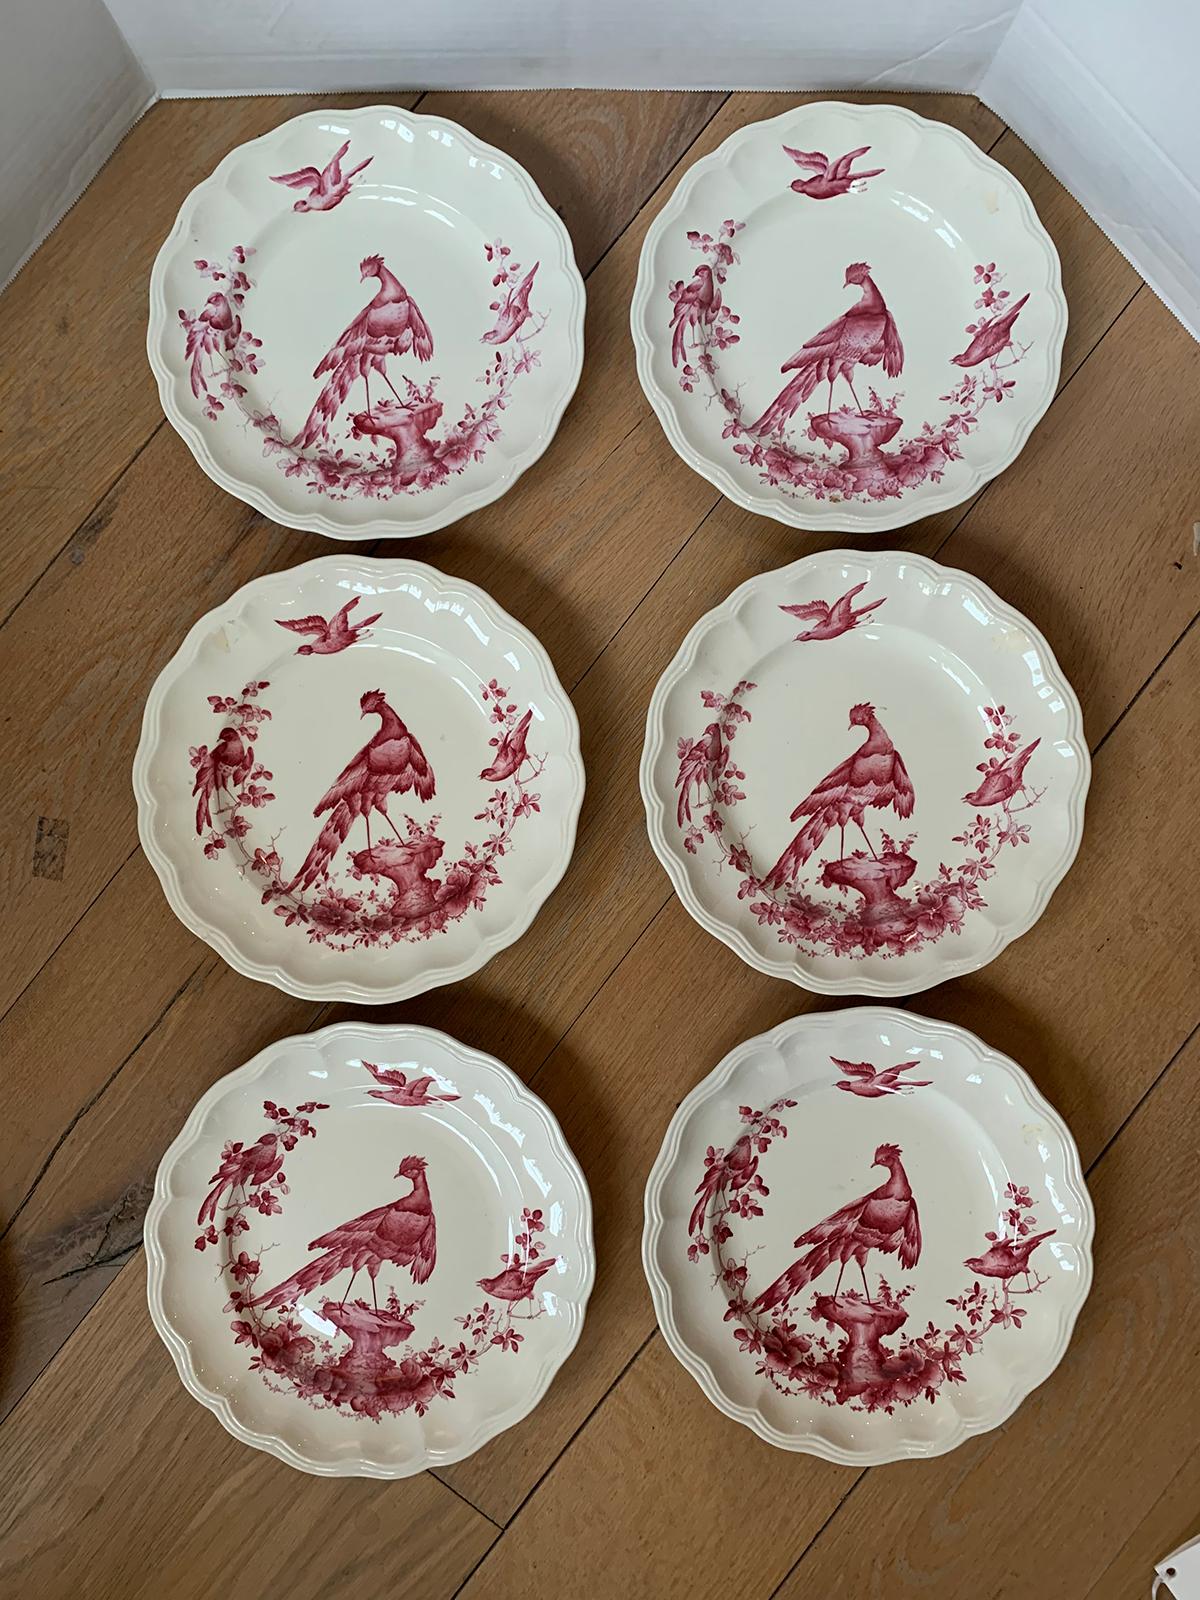 Set of six late 19th-early 20th century circa 1884-1929 English Copeland Spode red Chelsea bird pattern porcelain dinner plates with printed and impressed marks.